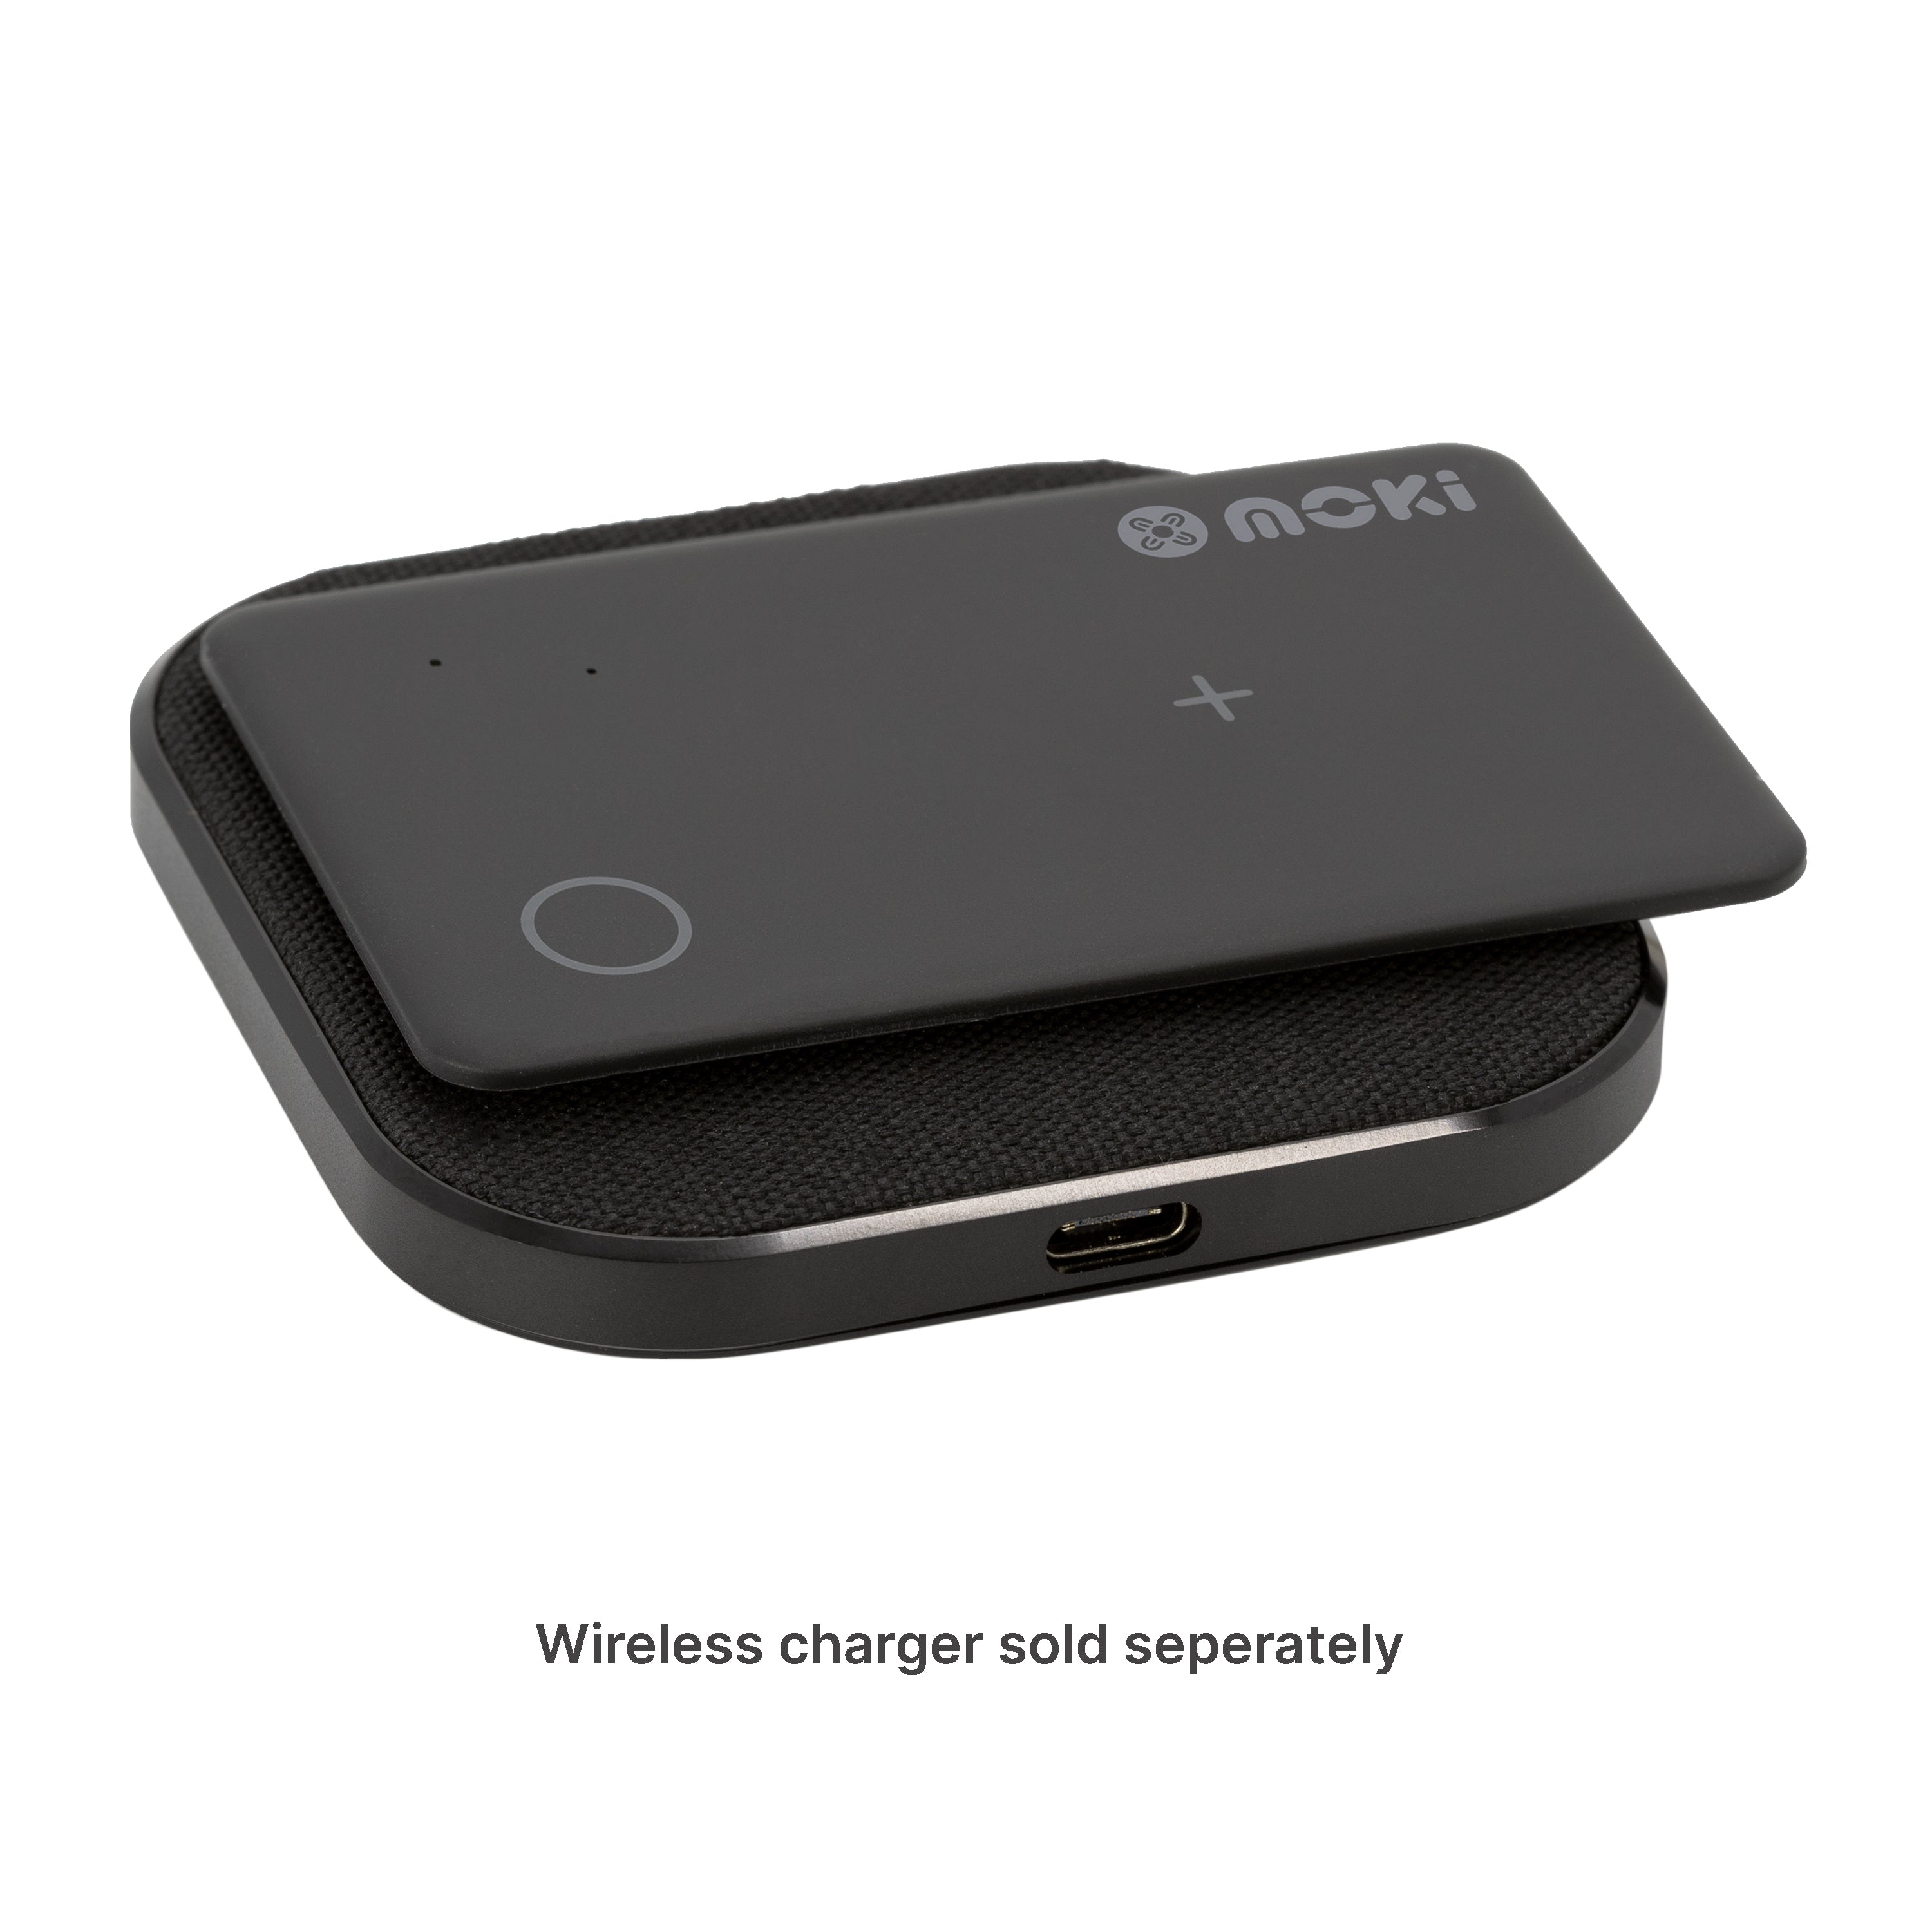 MokiTag Card Wireless - Works with Apple Find My